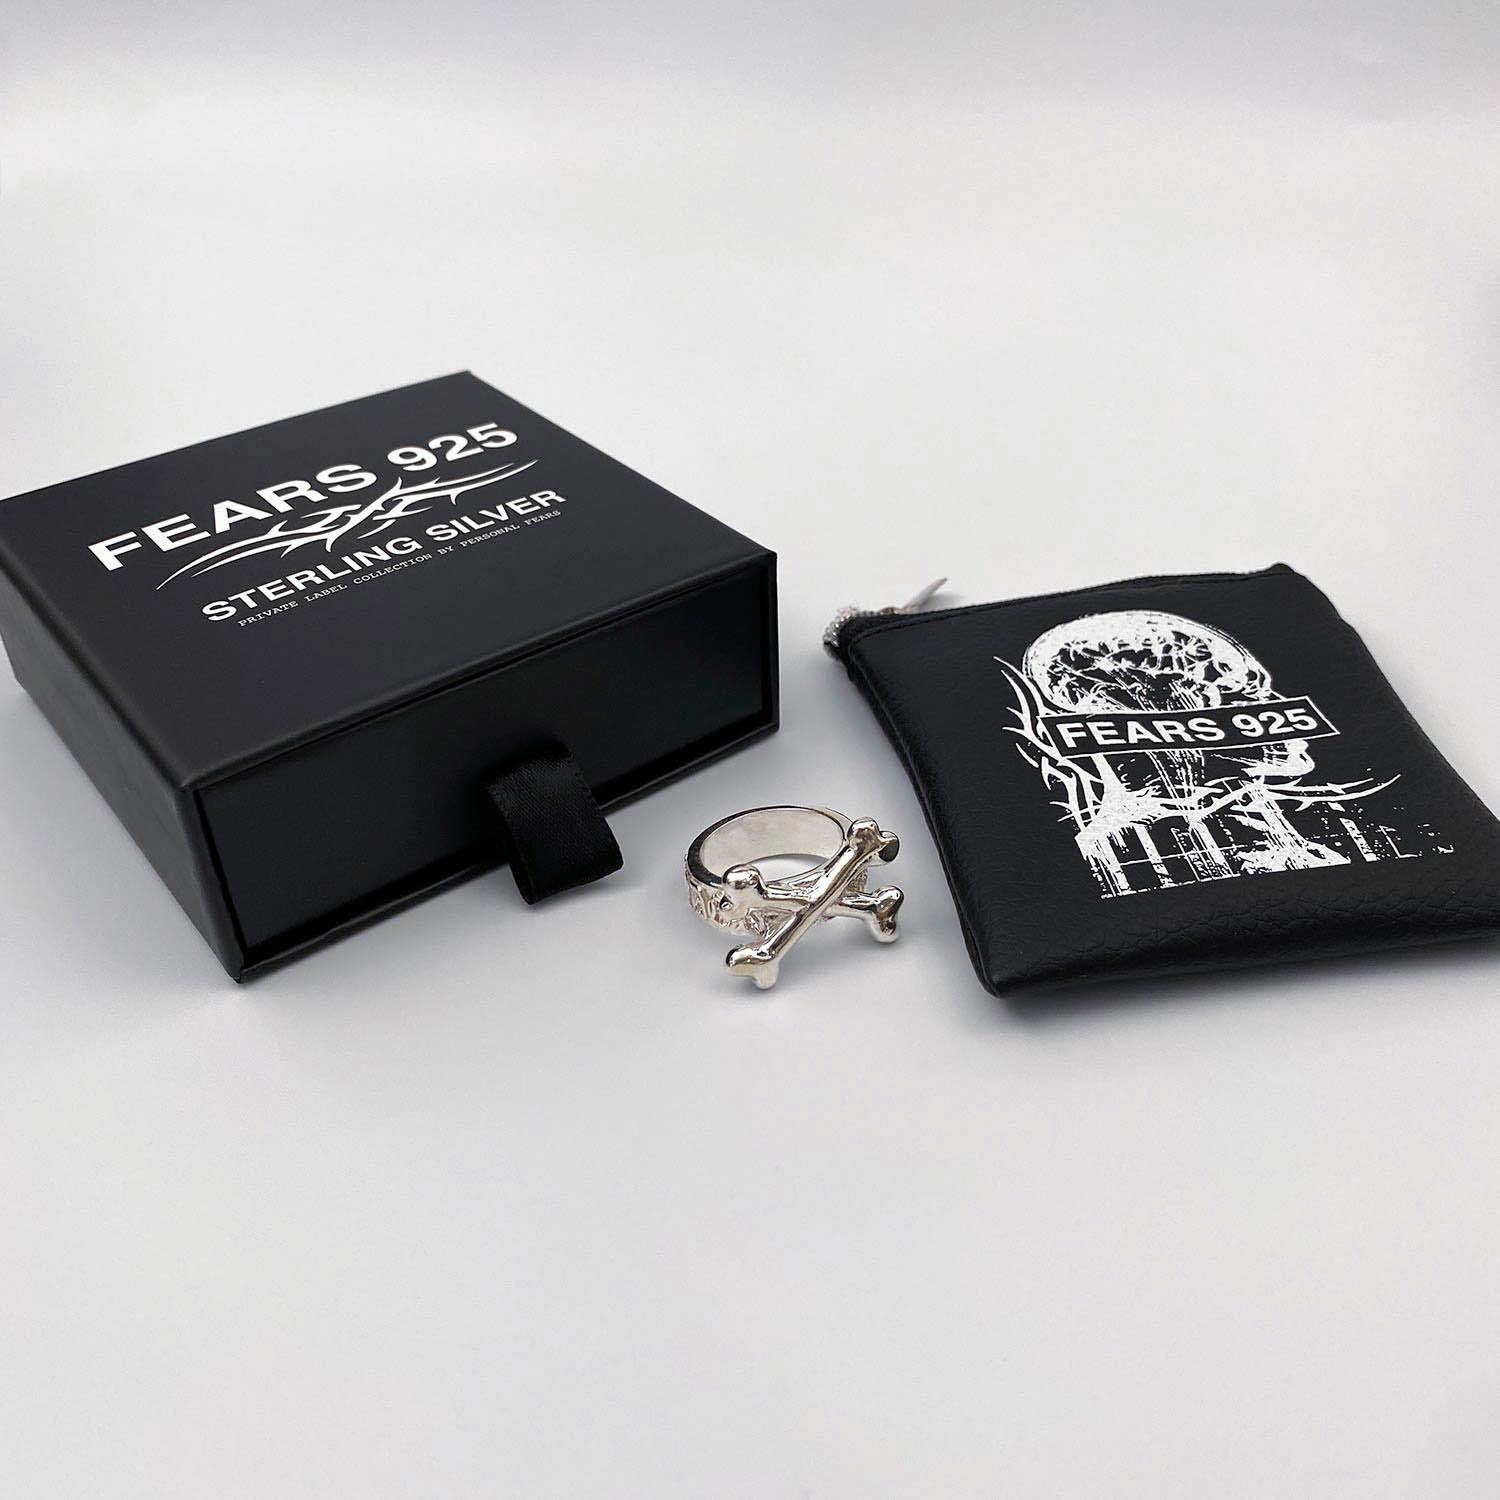 Personal Fears Never Surrender Ring Black Box Sterling Silver Jewelry